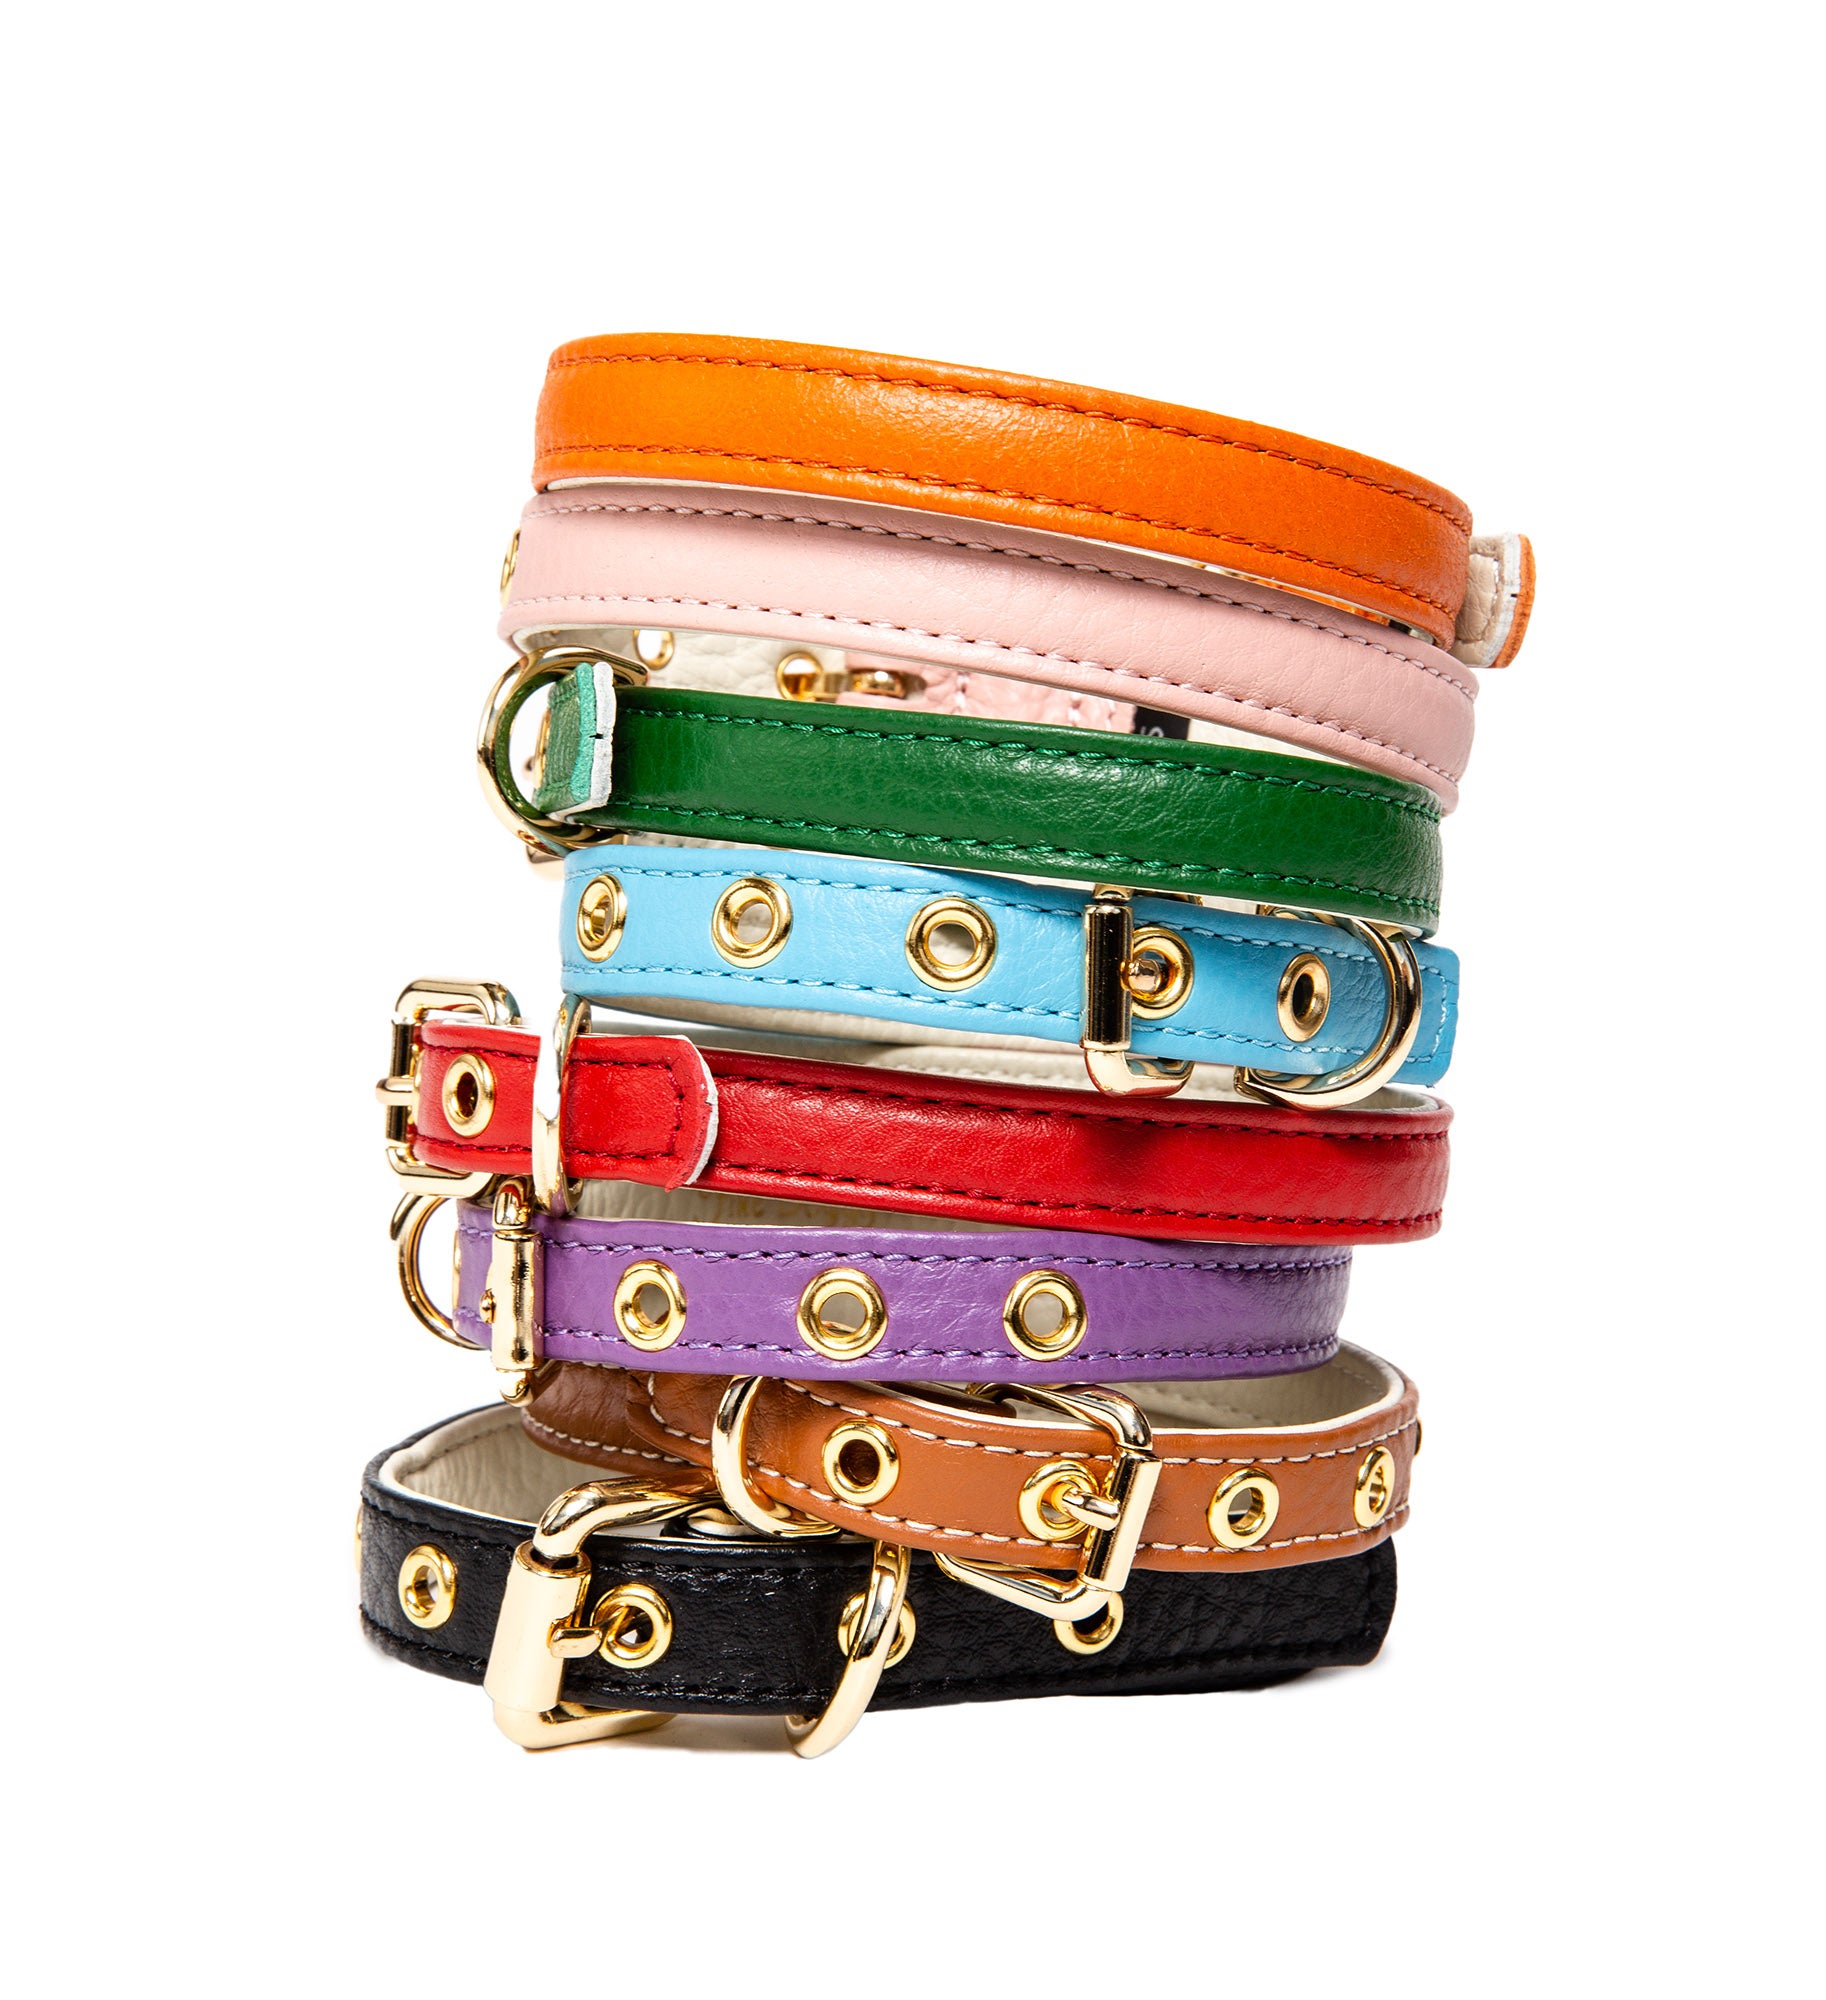 Dog Collar - Canine Styles Soft Leather Collar - 10 Colors